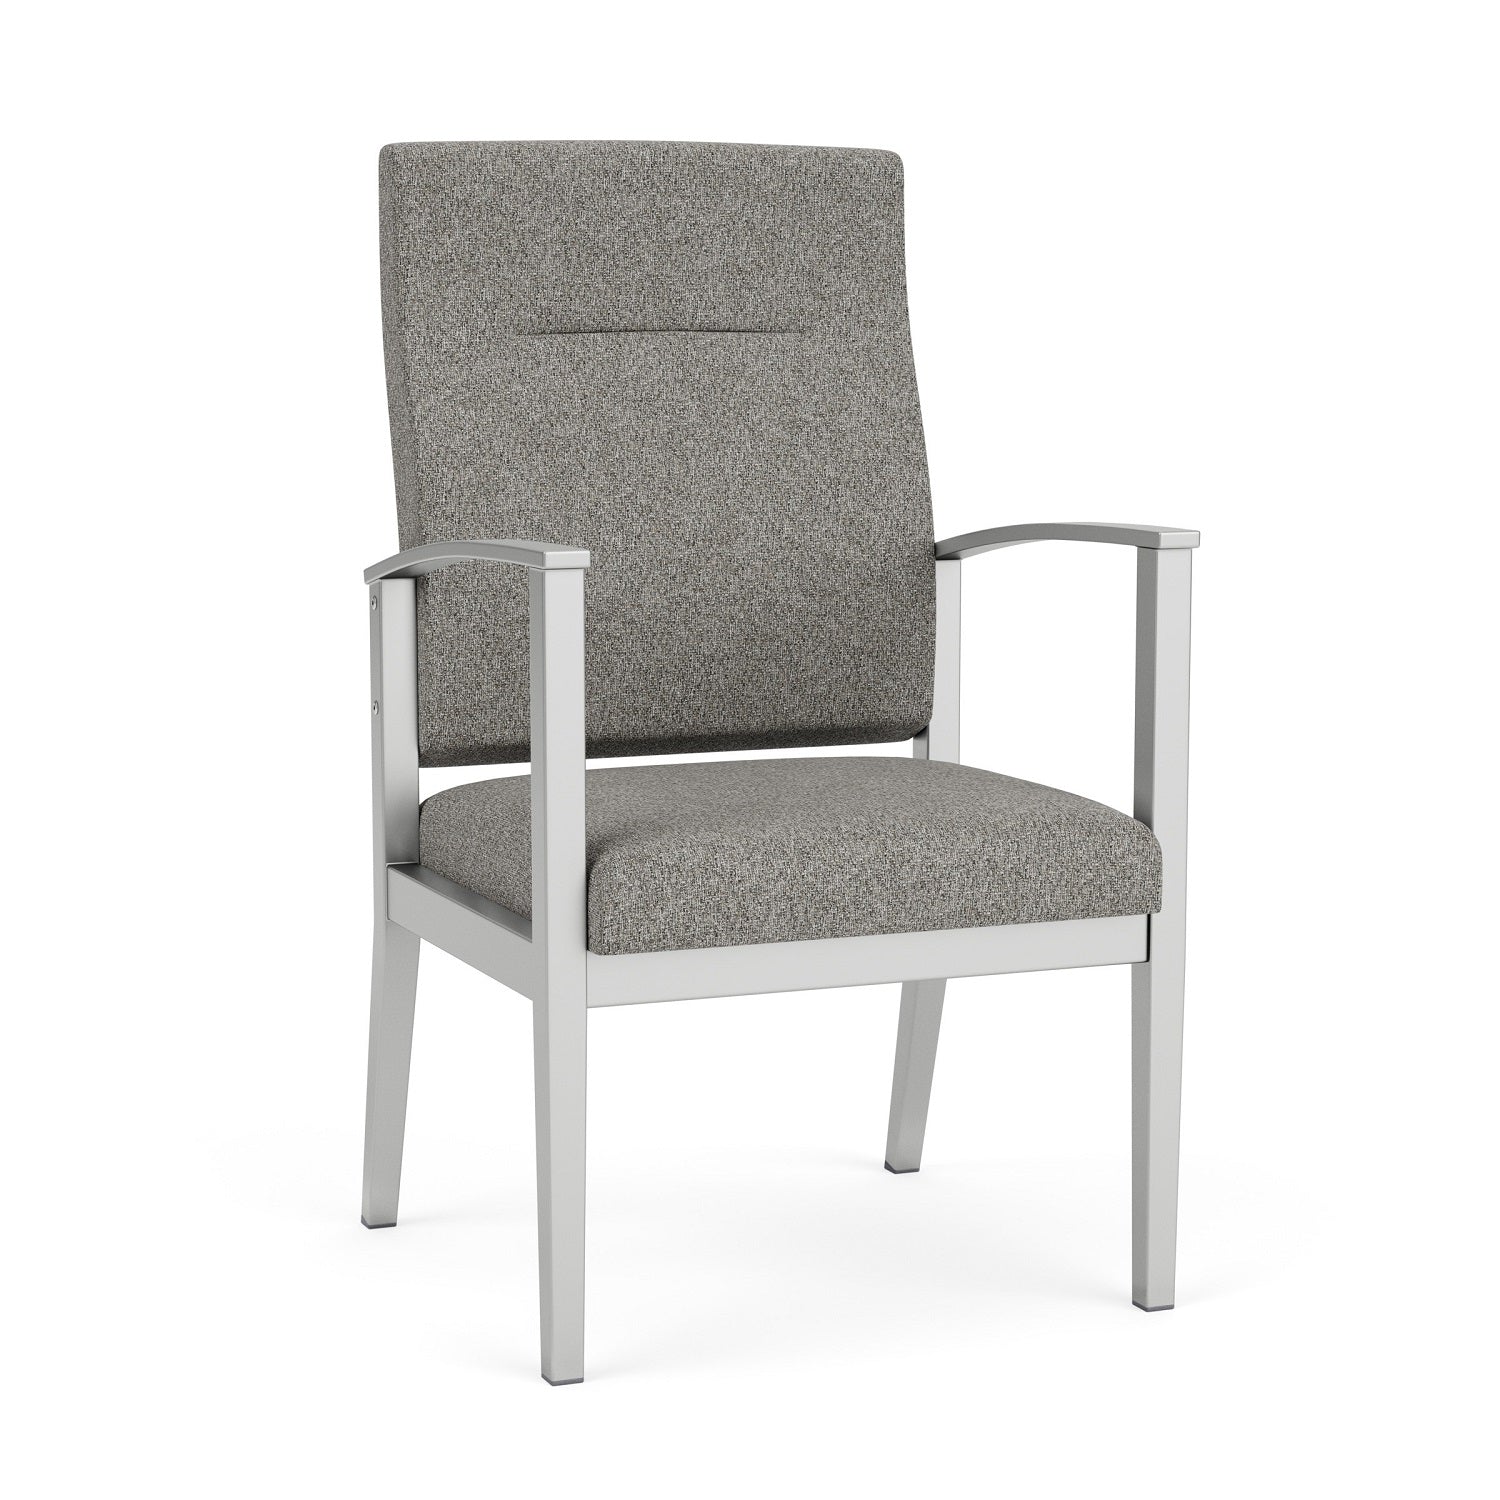 Amherst Steel Collection Reception Seating, Patient Chair, High Back, Standard Fabric Upholstery, FREE SHIPPING